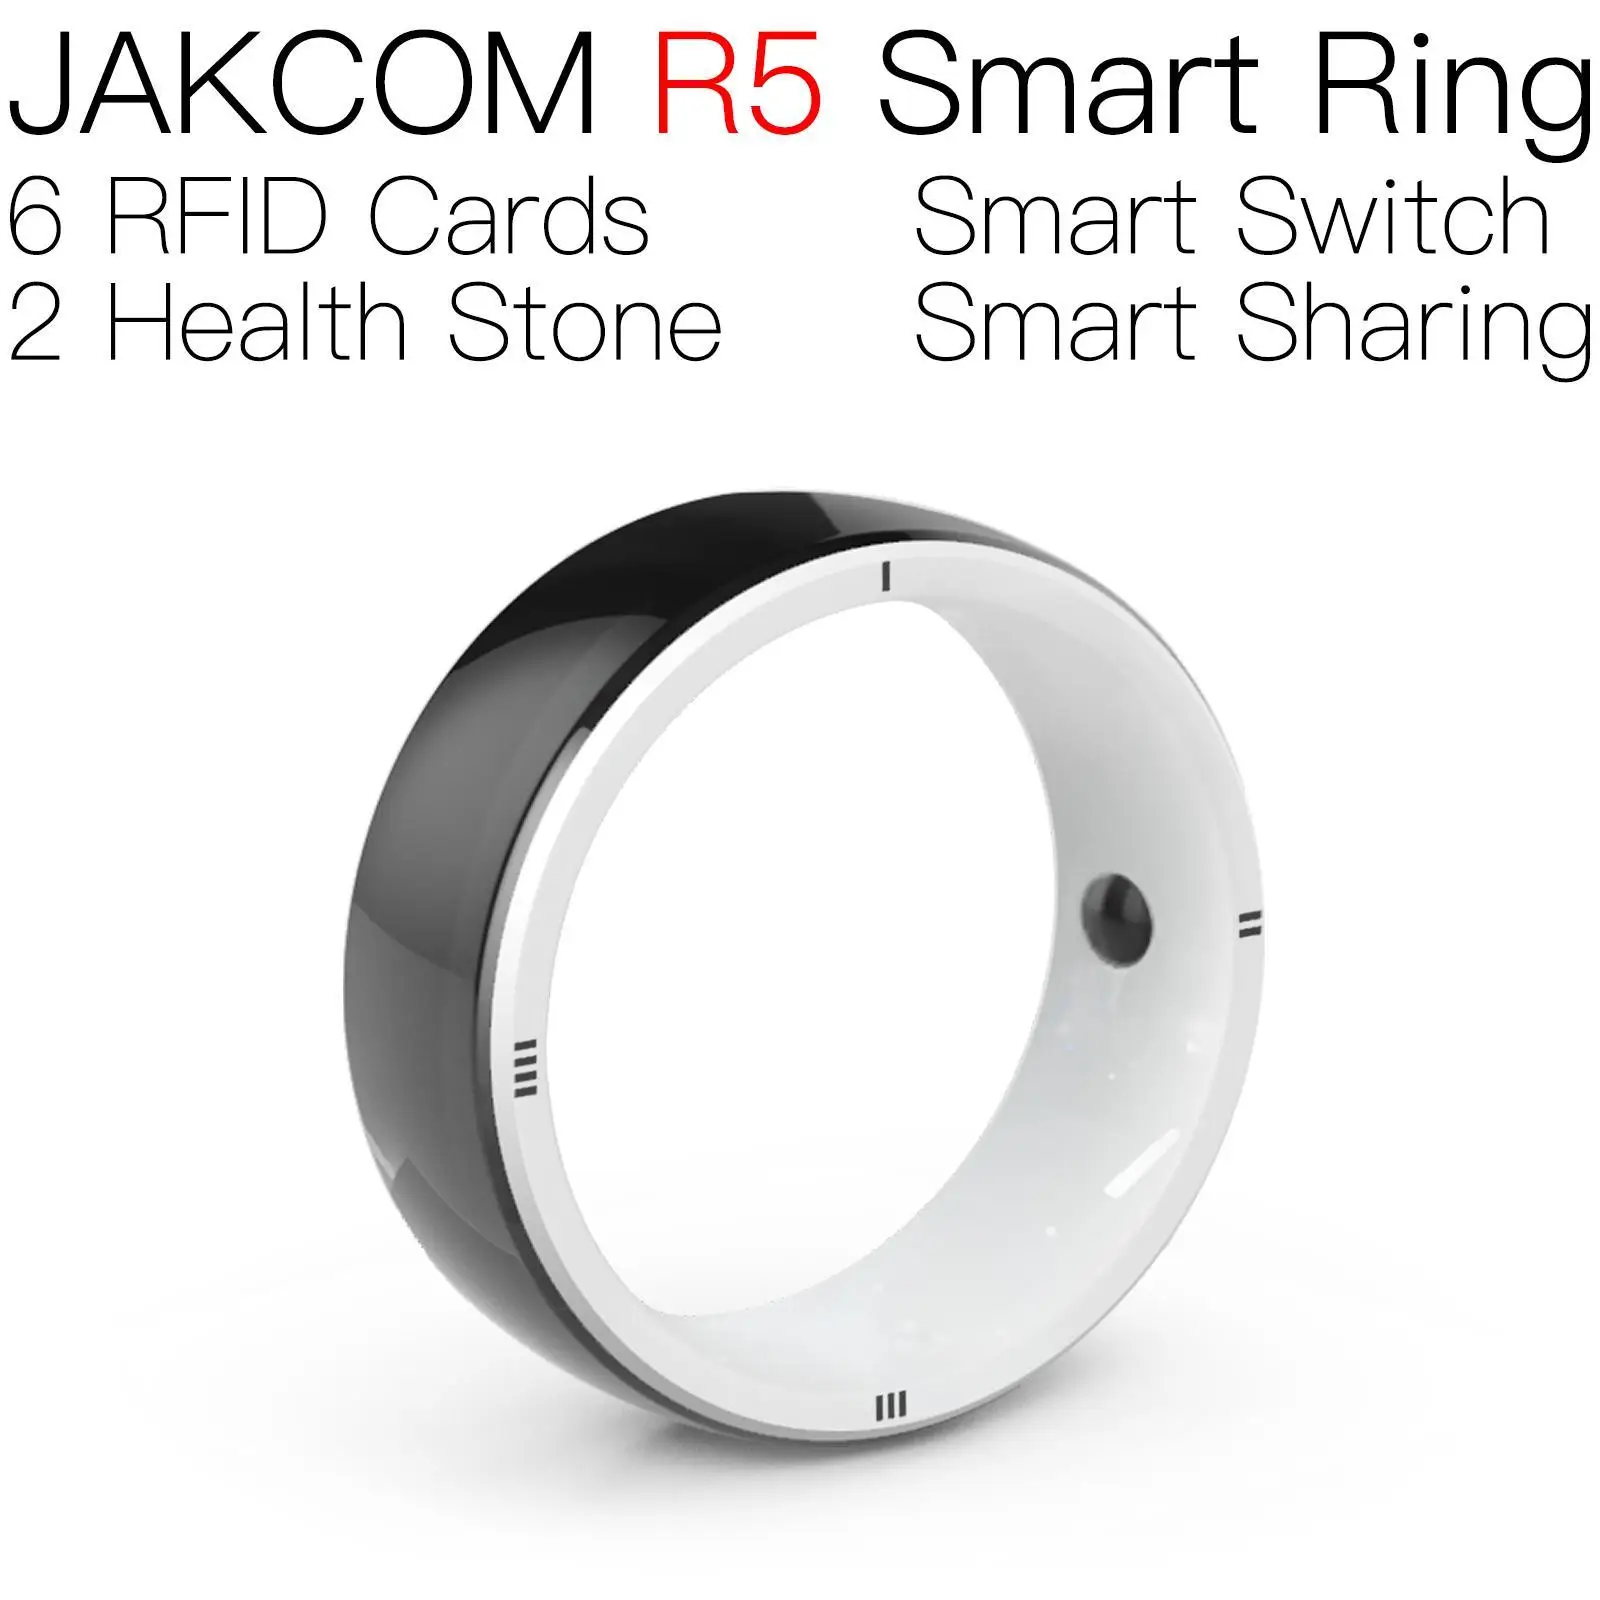 

JAKCOM R5 Smart Ring New arrival as microchip animal 50pcs hbo rfid chip write passive uhf tag duplicator nfc keychain case